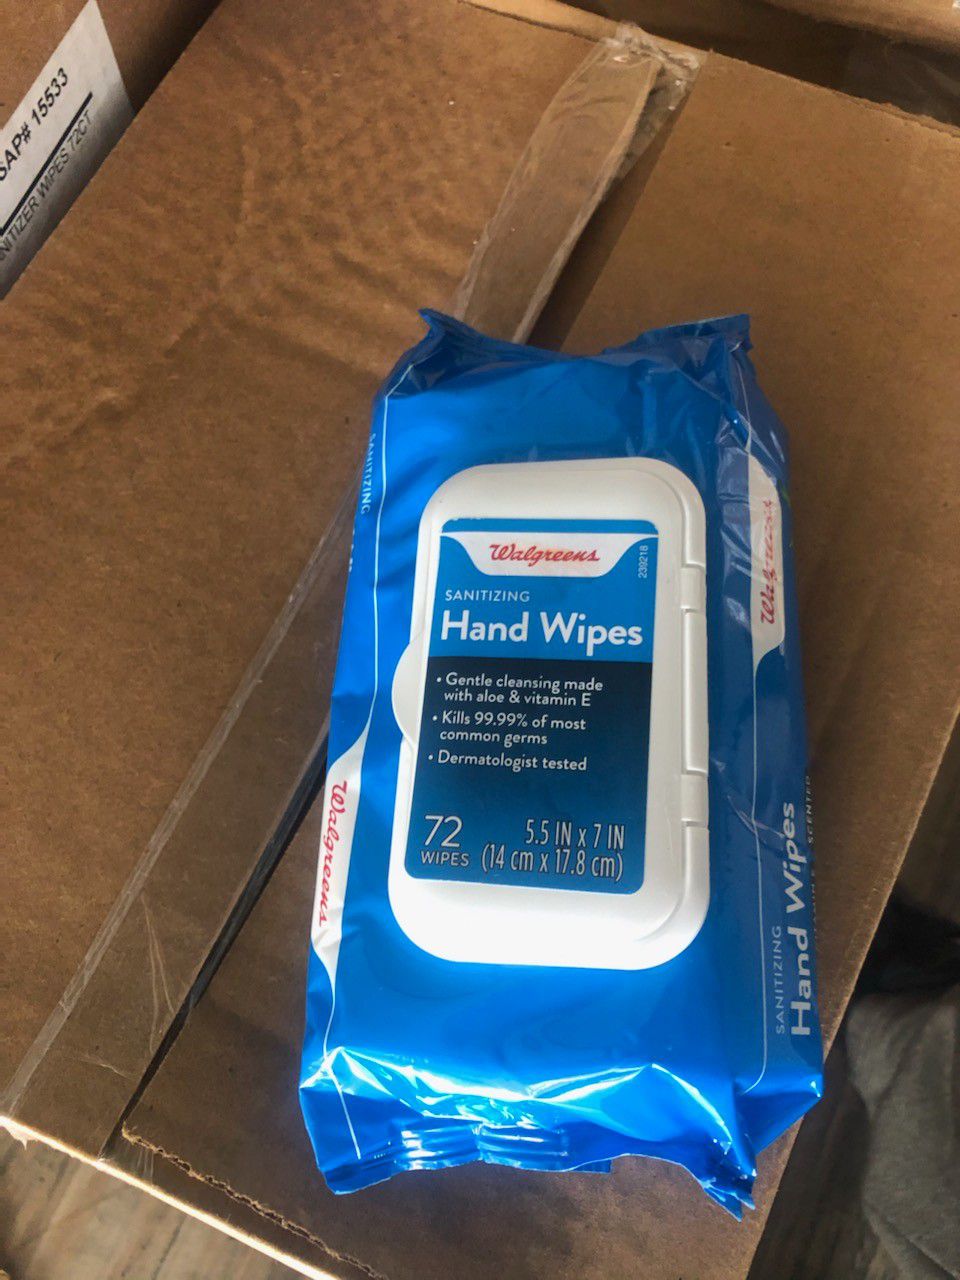 Face Wipes